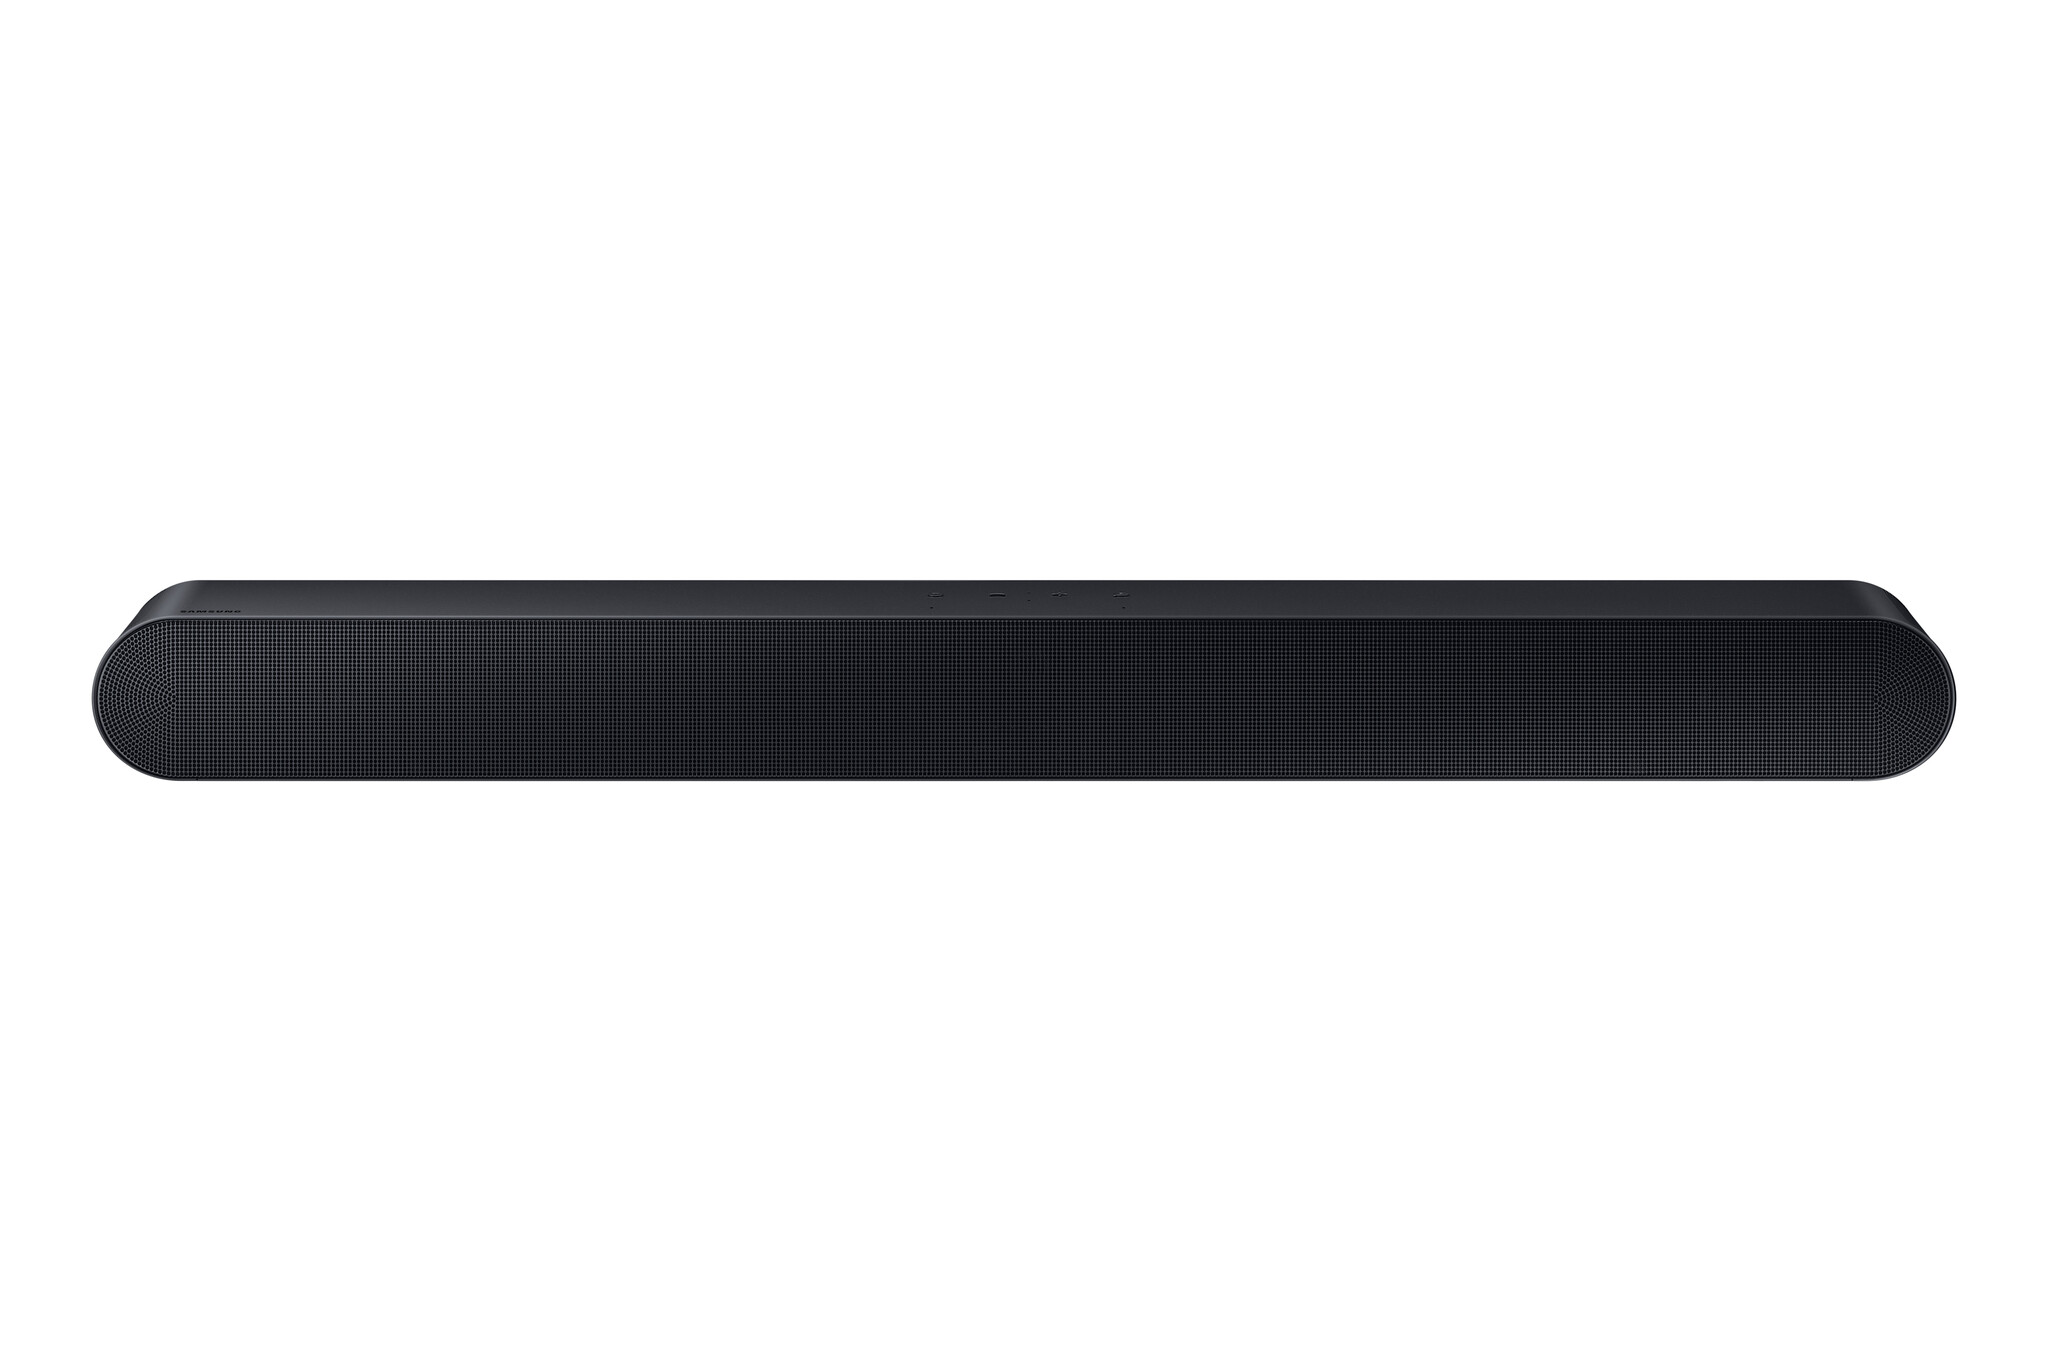 Samsung HW-S60B Bluetooth 5.0 Soundbar with Q-Symphony, Dolby Atmos® and DTS, and 7 Built-In Speakers #366516